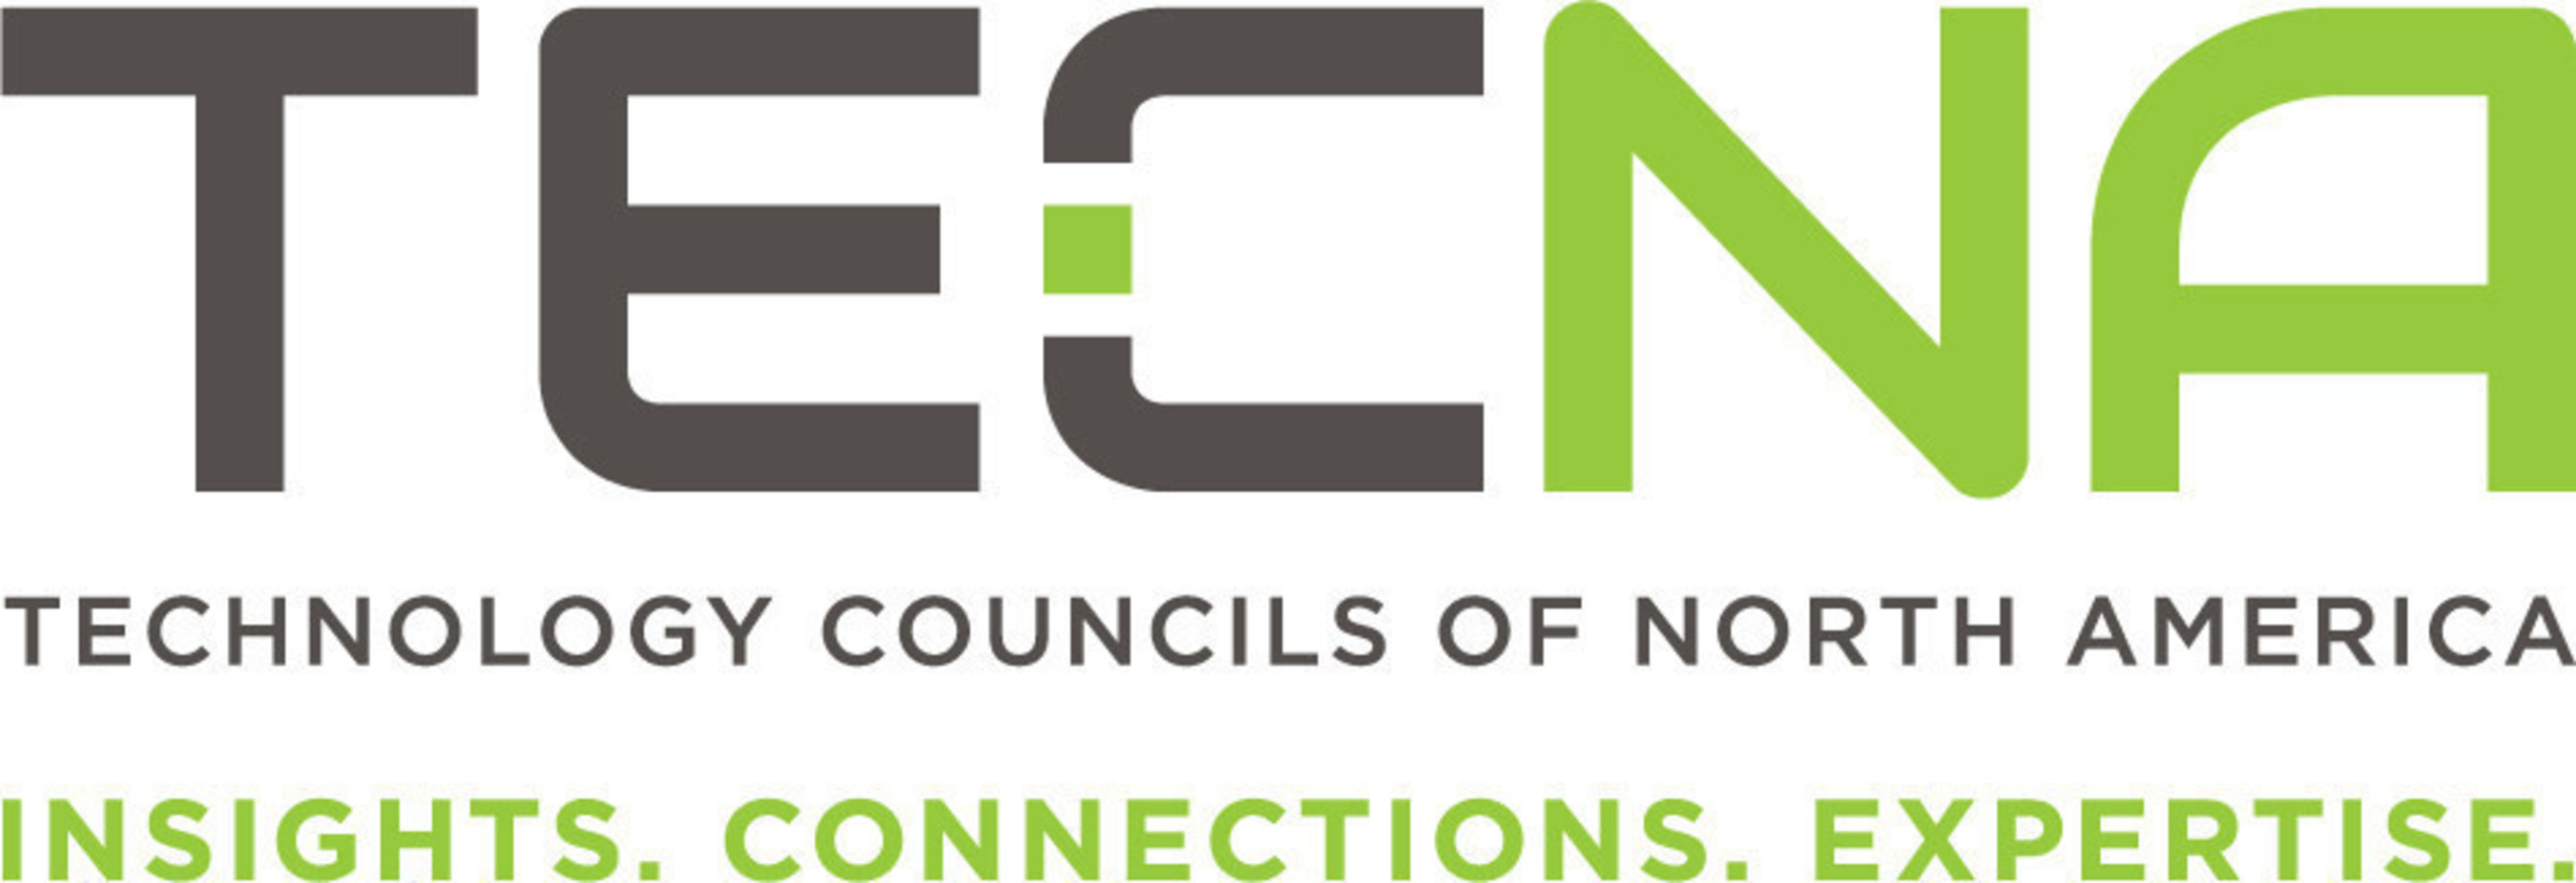 The Technology Councils of North America (TECNA) represents over 50 IT and technology trade organizations that, in turn, represent more than 22,000 technology-related companies in North America.